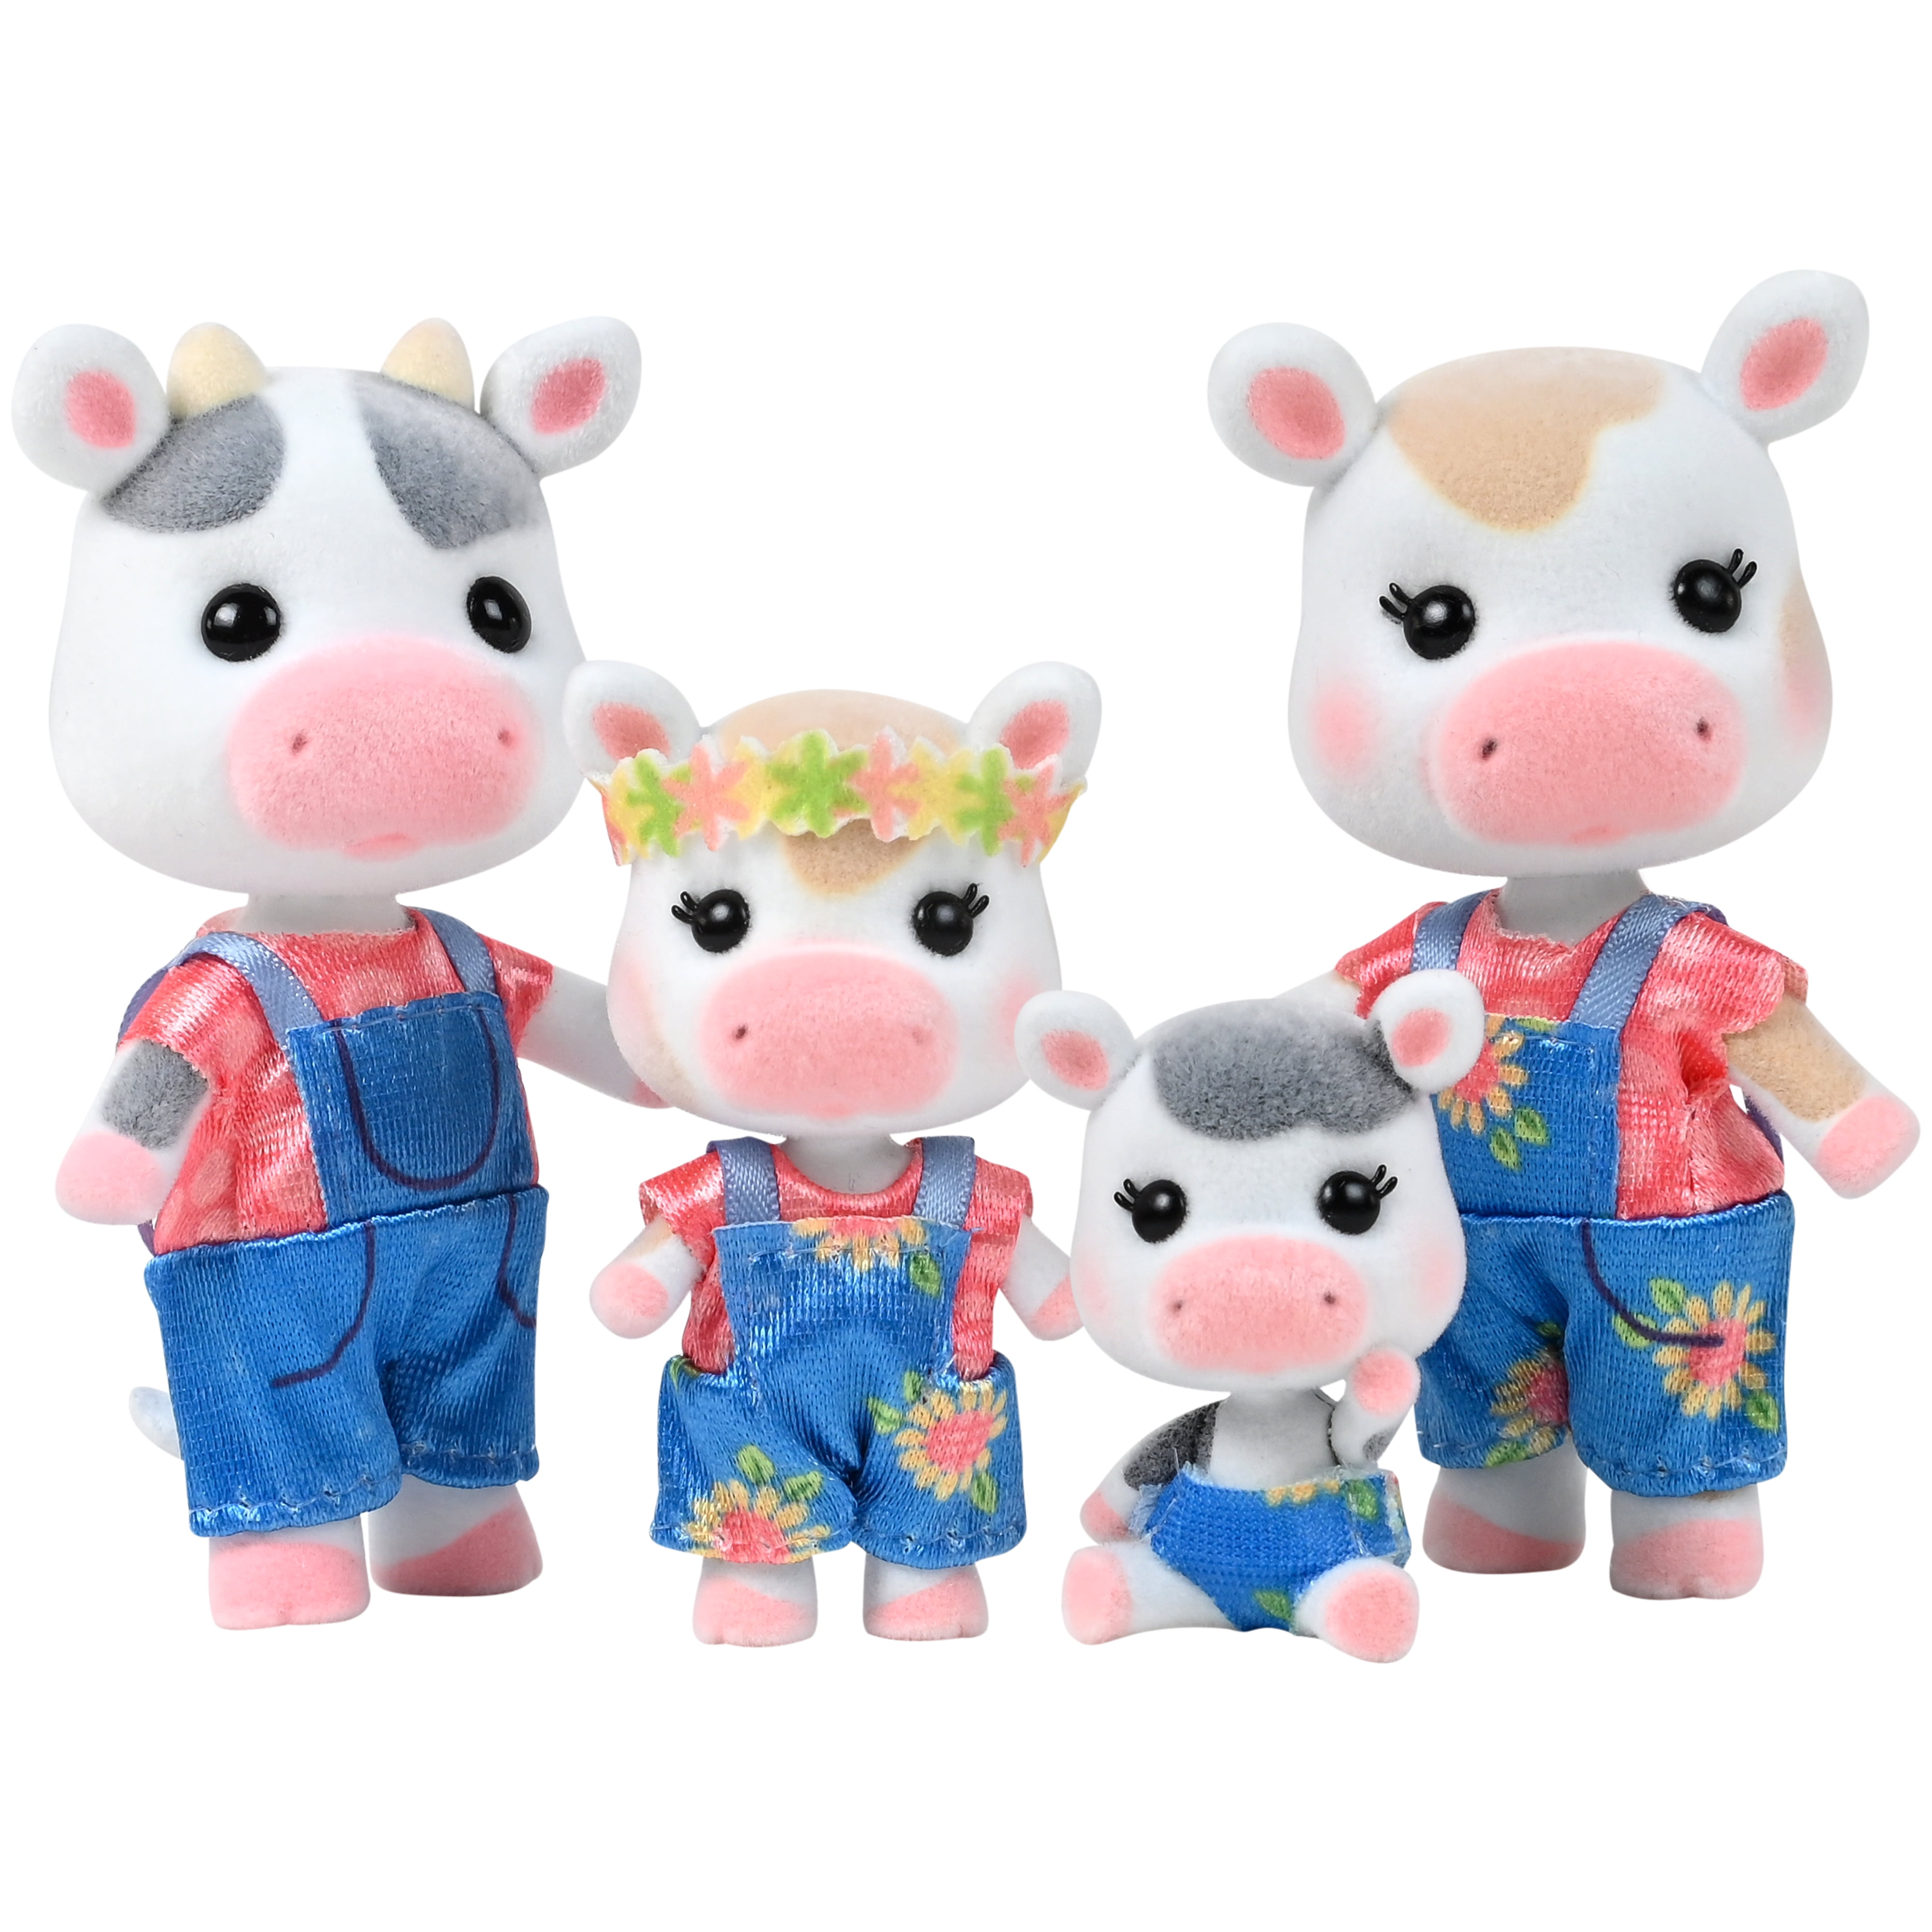 Honey Bee Acres The Cloverberrys Cow Family, 4 Miniature Doll Figures, Ages 3 and up